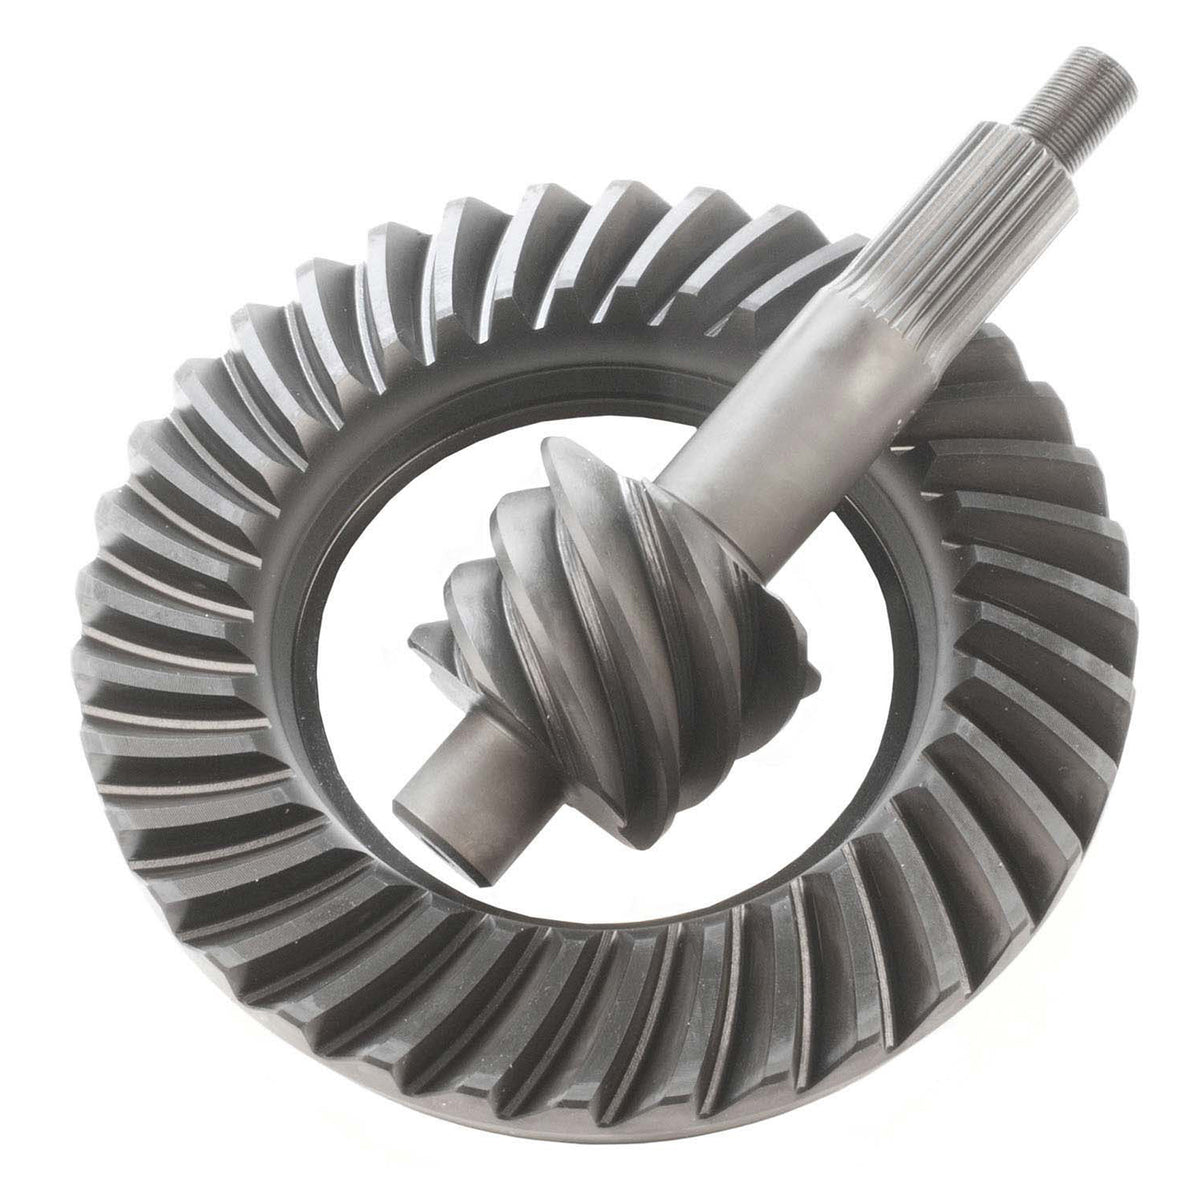 Excel Ring & Pinion Gear Set Ford 9in 6.00 Ratio